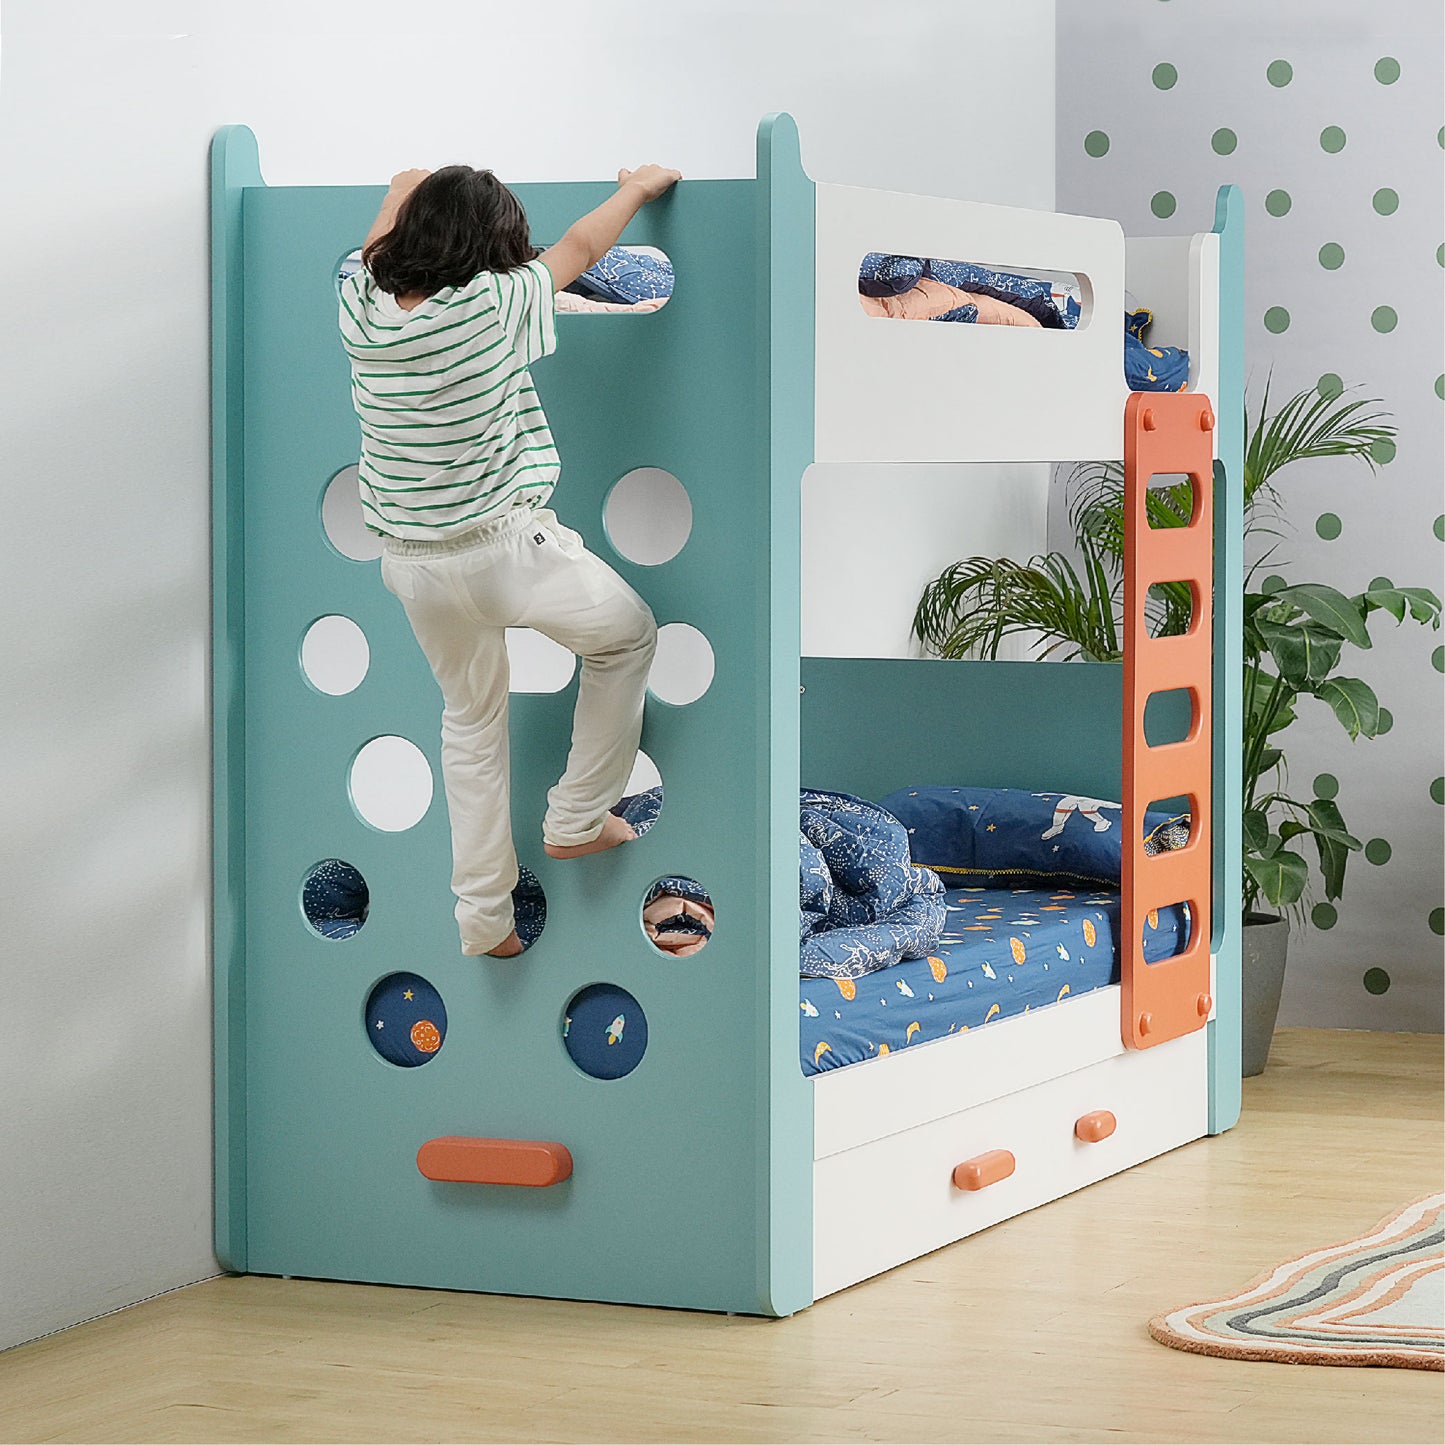 Climbr Bunk Bed with 2 Mattresses